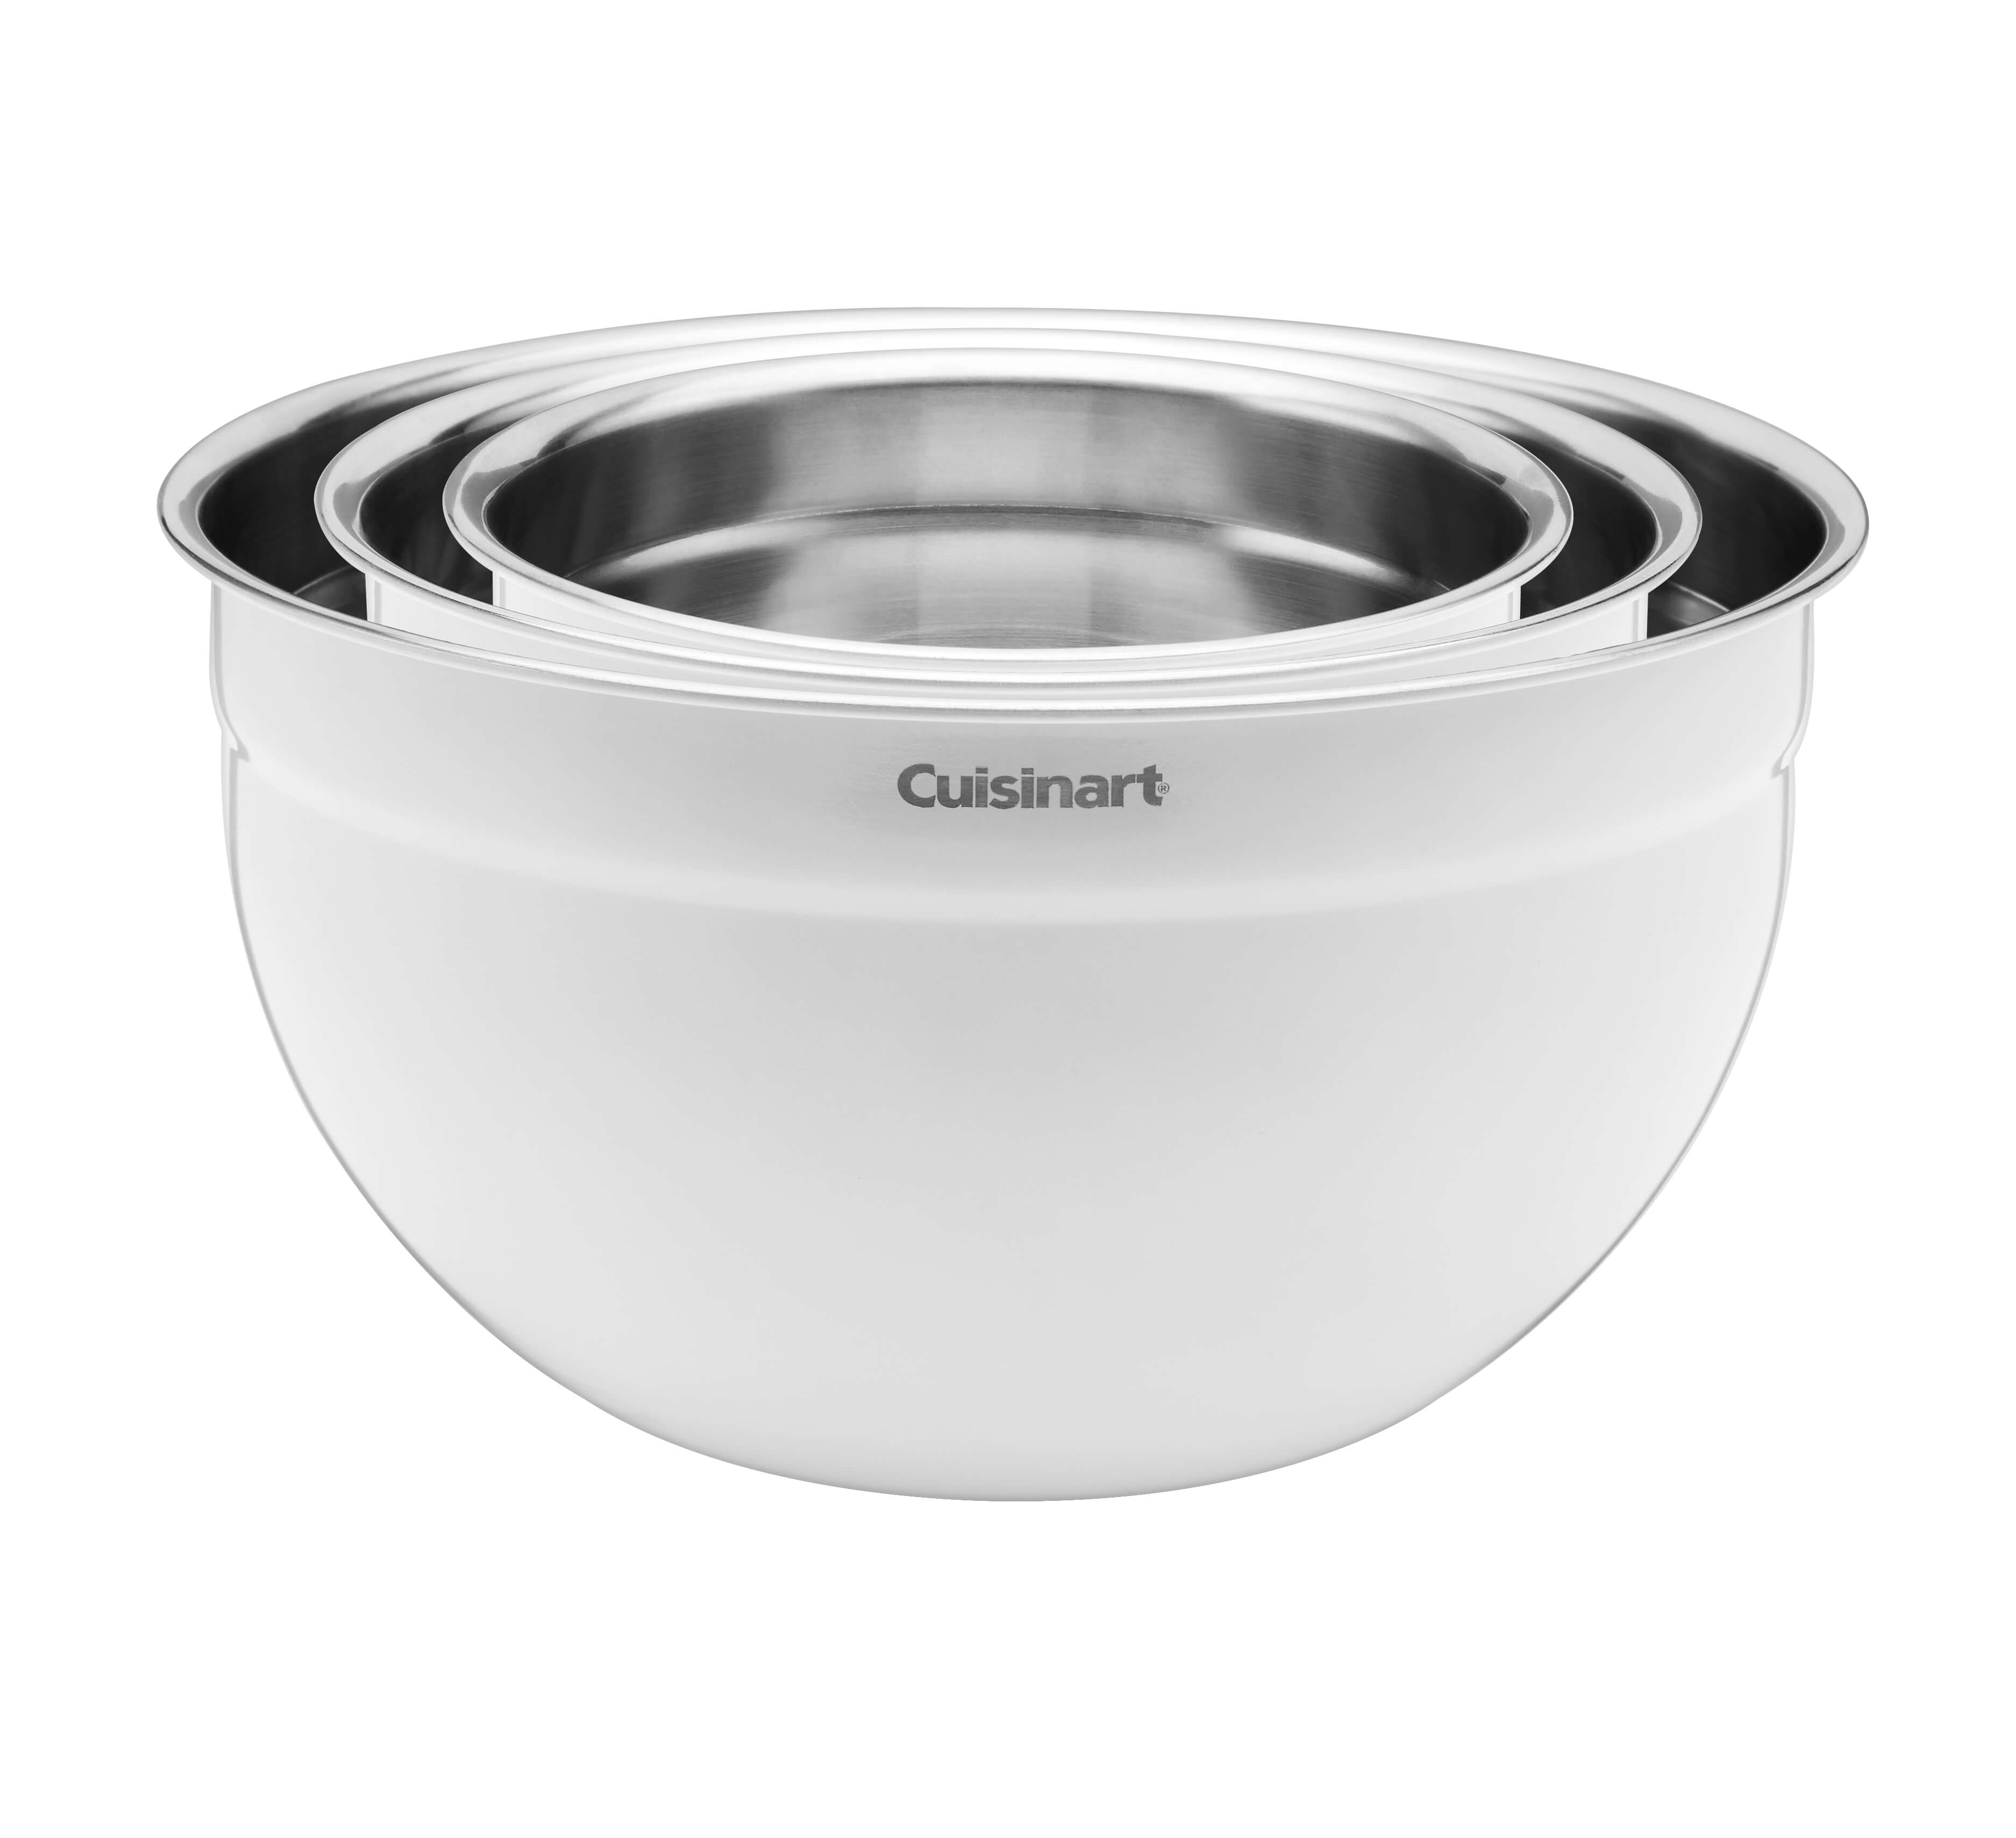 Cuisinart Set of 3 BPA-Free Mixing Bowls White mint Condition